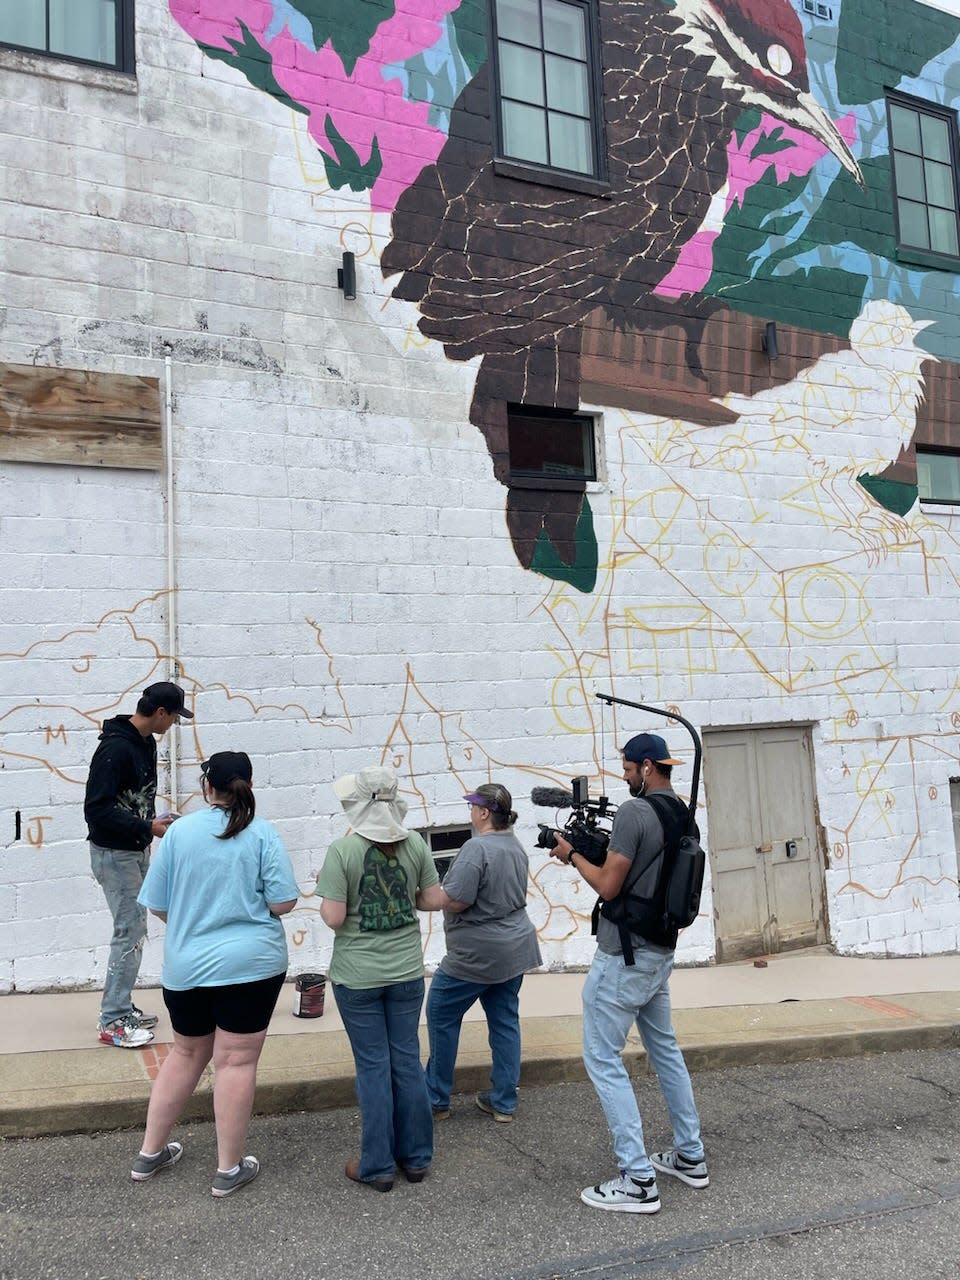 PBS North Carolina came out to interview Gabe Eng-Goetz and the team of local apprentices for a story on the downtown Mars Hill art mural.